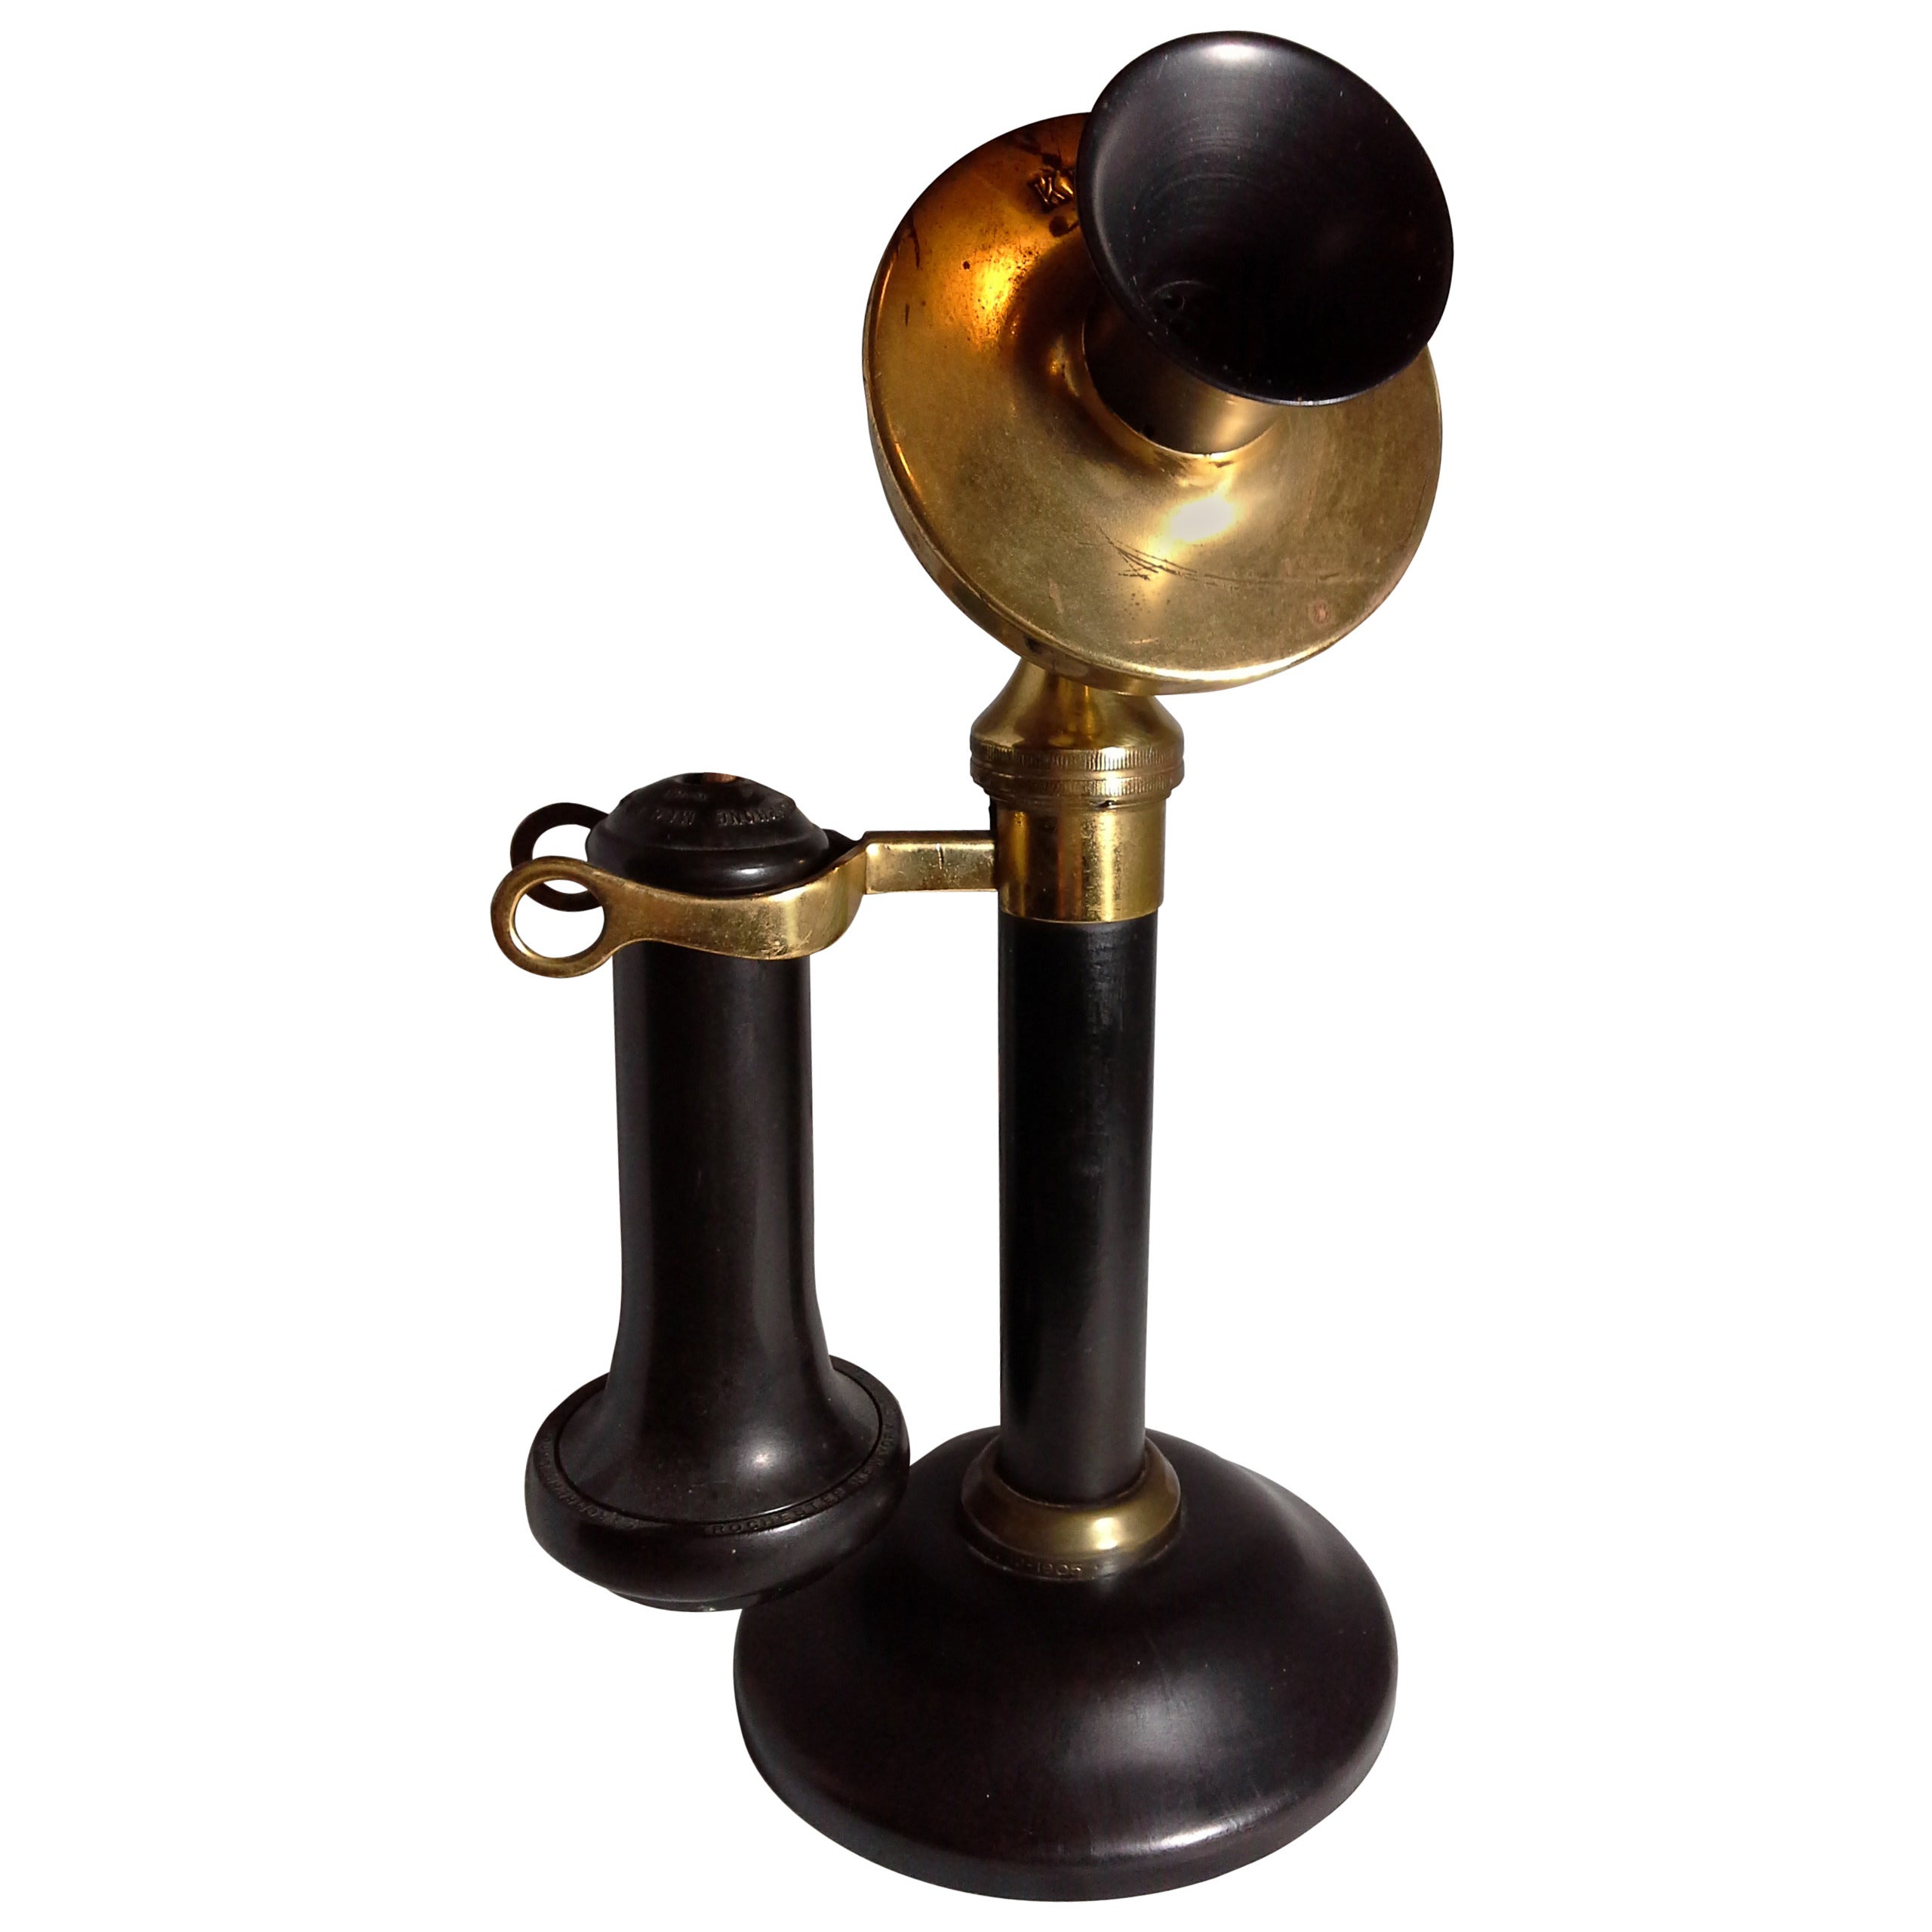 Kellogg Chicago Candlestick Brass and Bakelite, Patented 1901